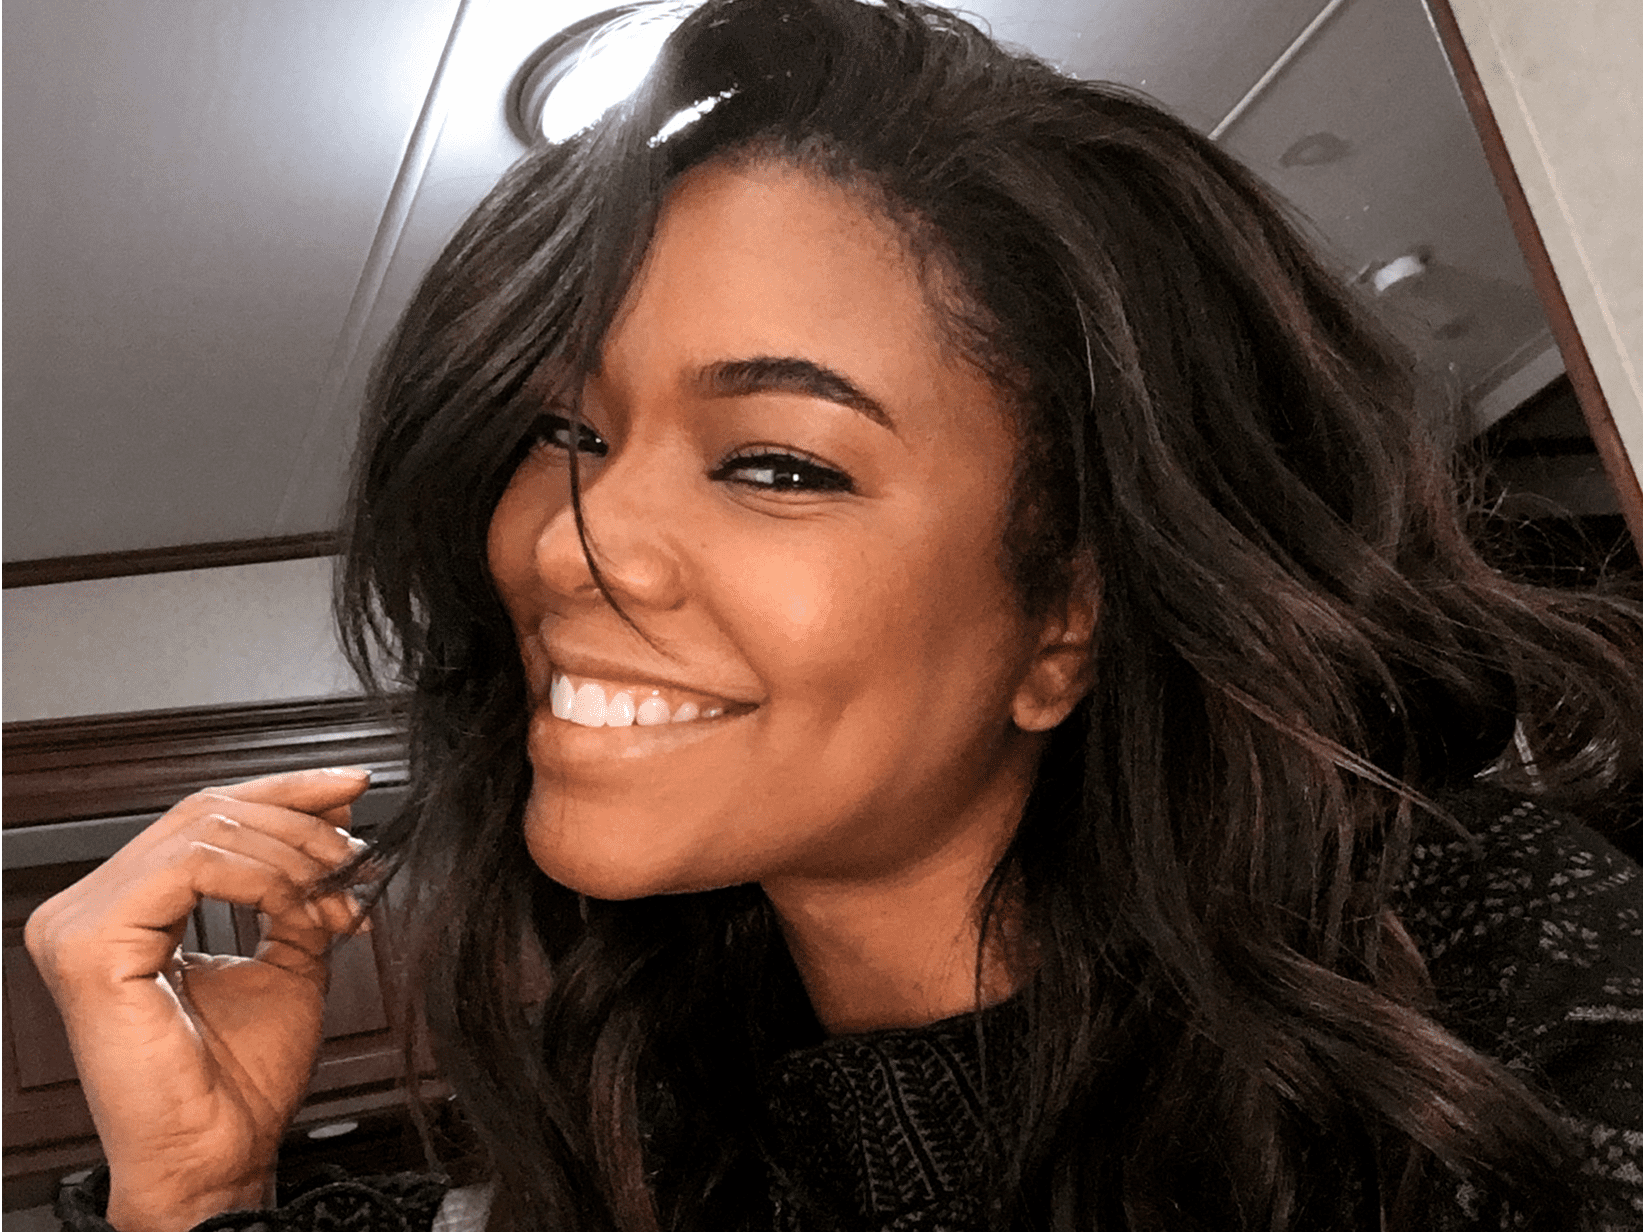 gabrielle-union-shows-off-her-flourishing-curls-and-fans-are-in-awe